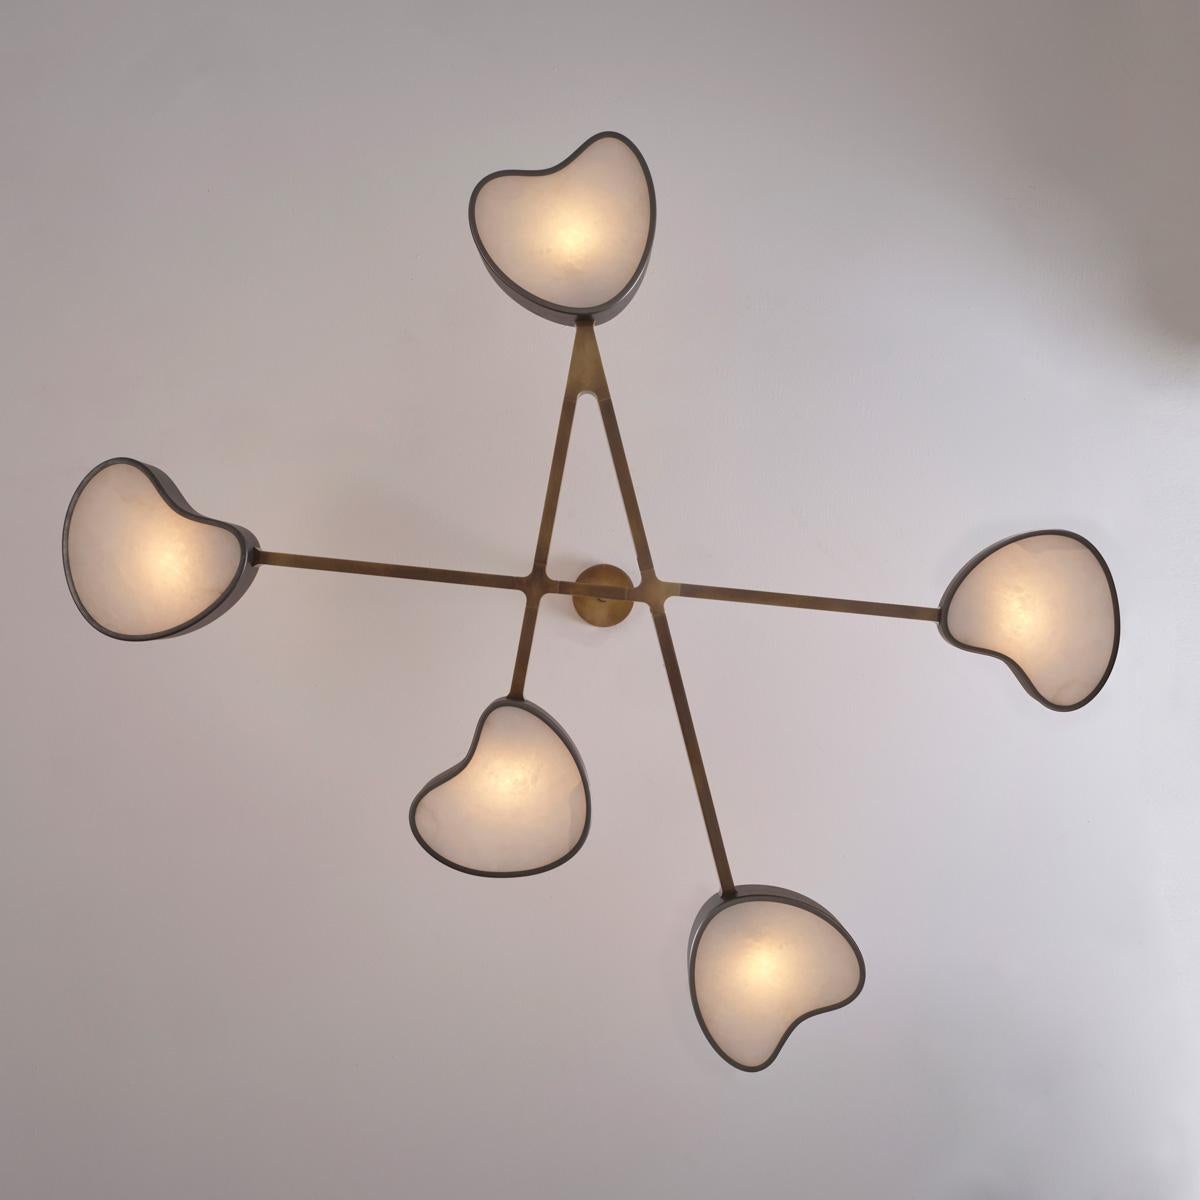 Modern Cuore N.5 Ceiling Light by Gaspare Asaro. Peltro and Bronze Finish For Sale